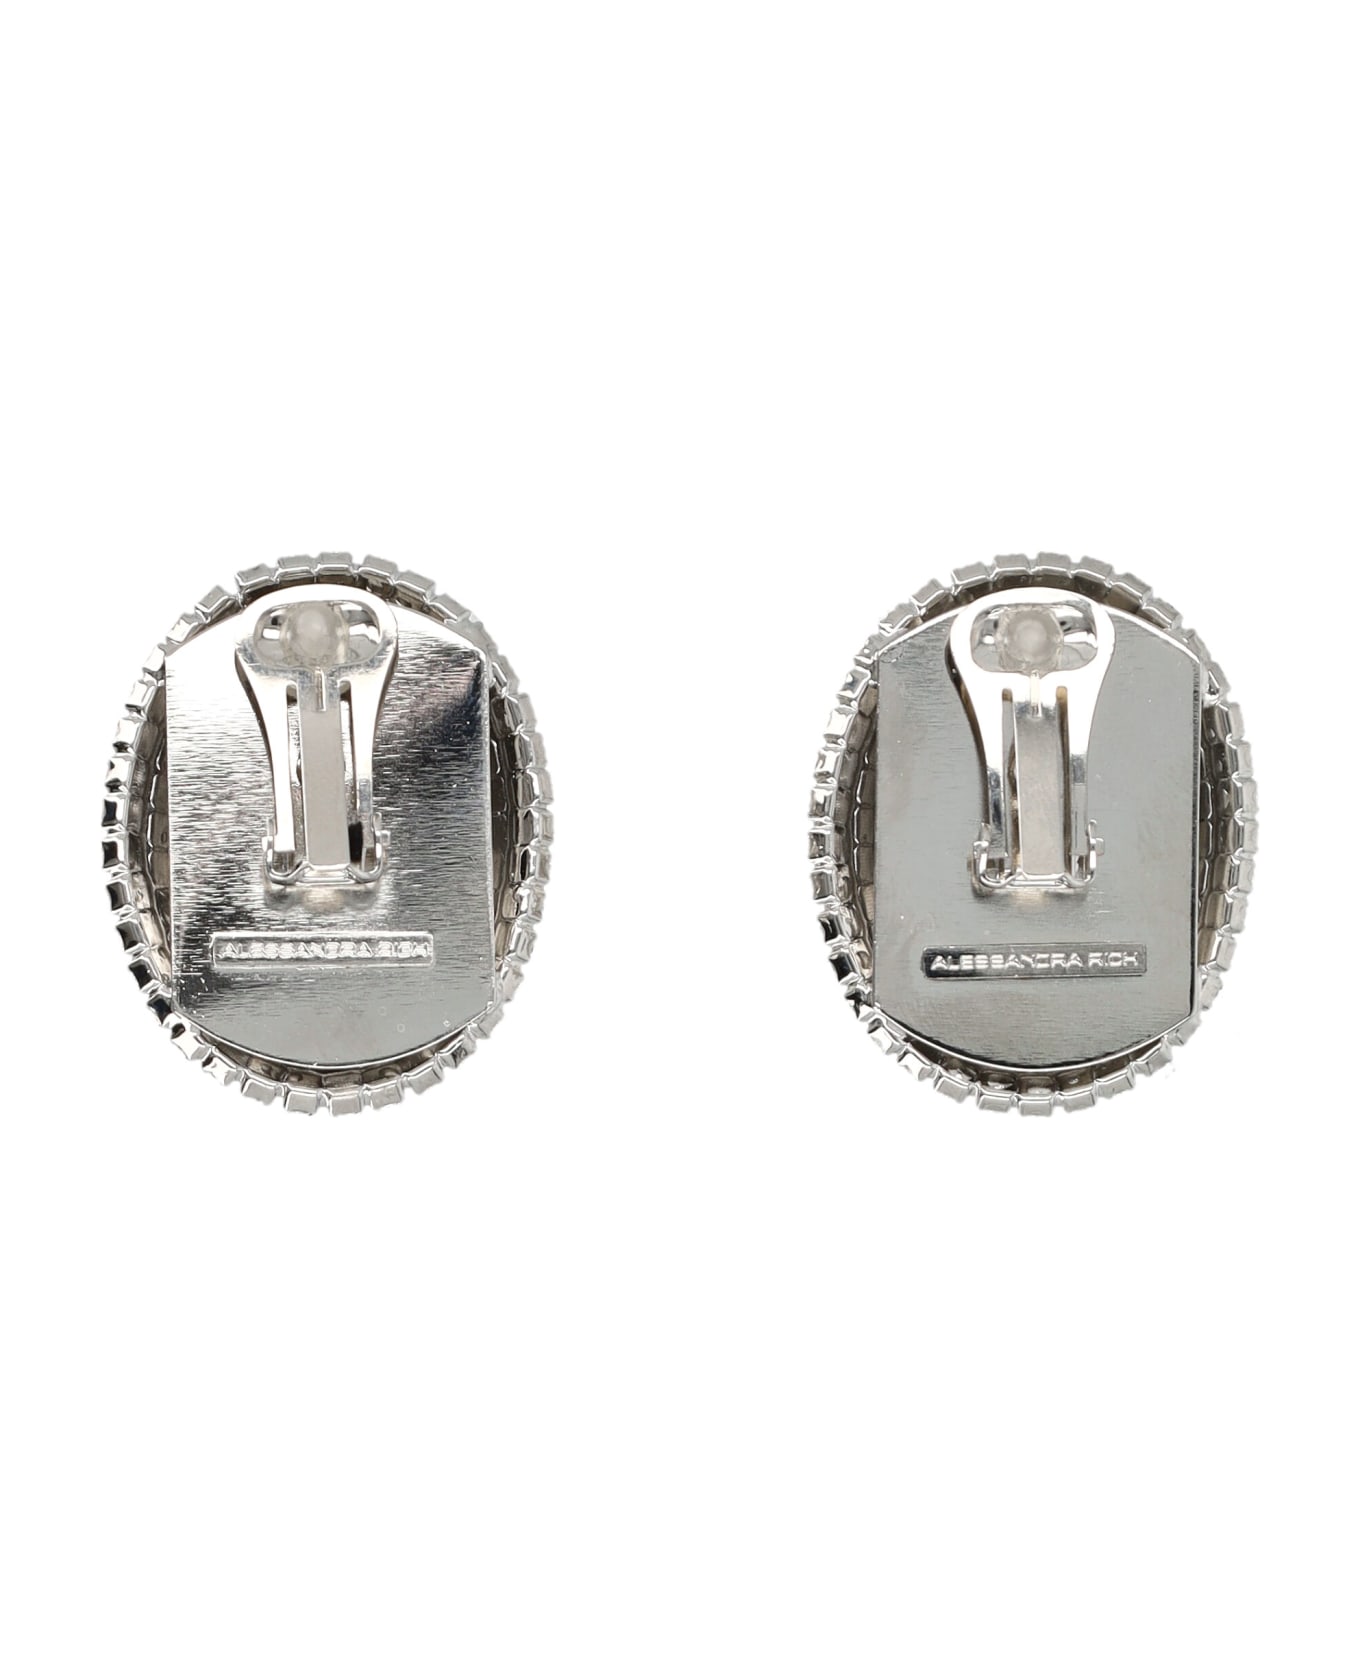 Alessandra Rich Oval With Pearl Earrings - SILVER CRYSTAL イヤリング